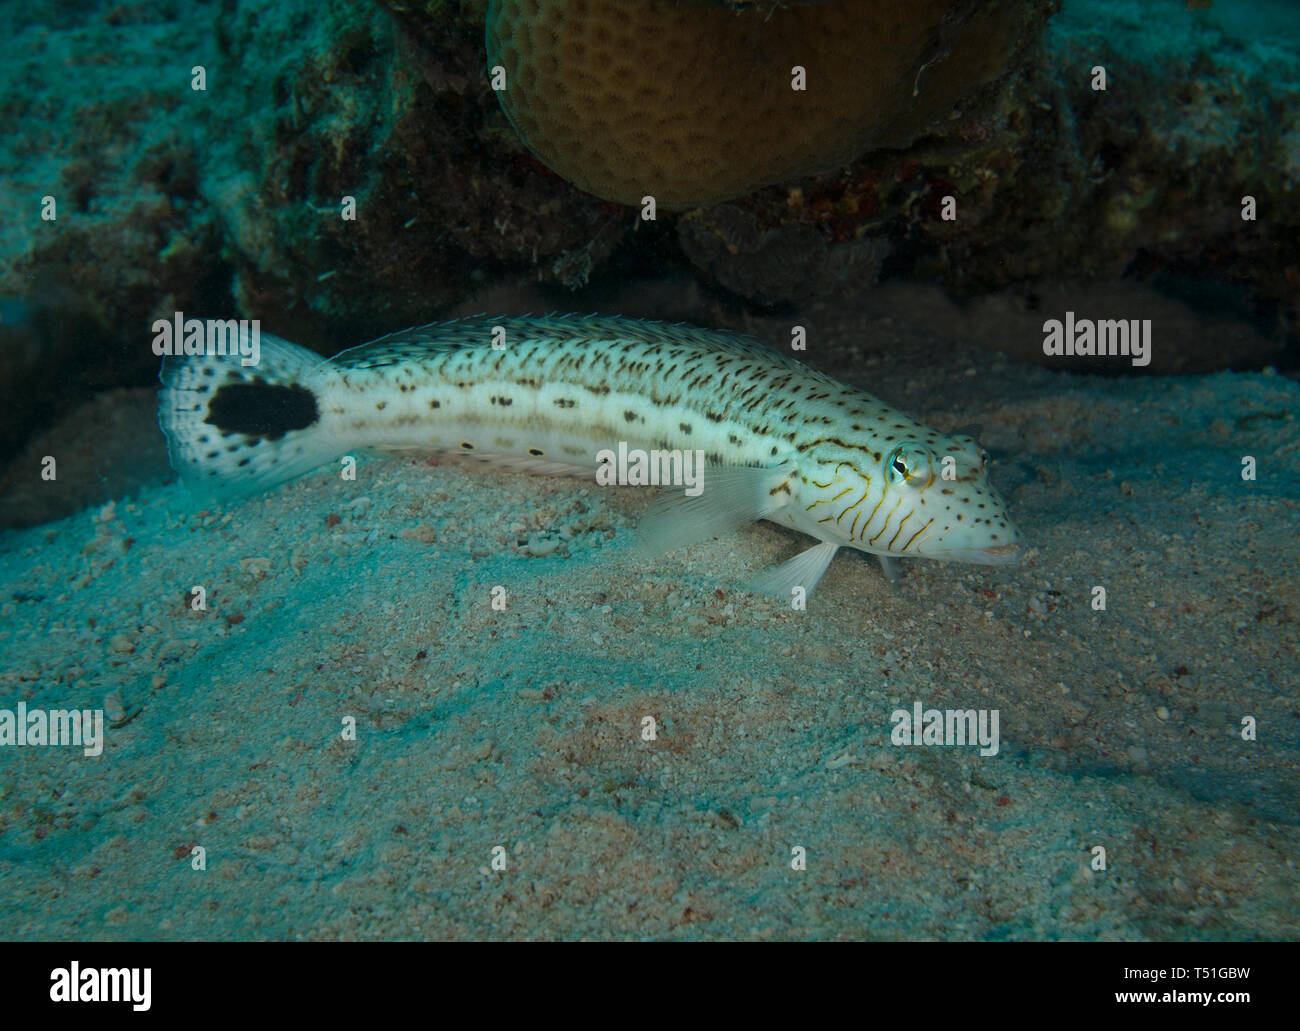 Speckled sandperch fish, Parapercis hexophthalma, underwater on the sandy bottom of the red sea , Hamata, Egypt Stock Photo